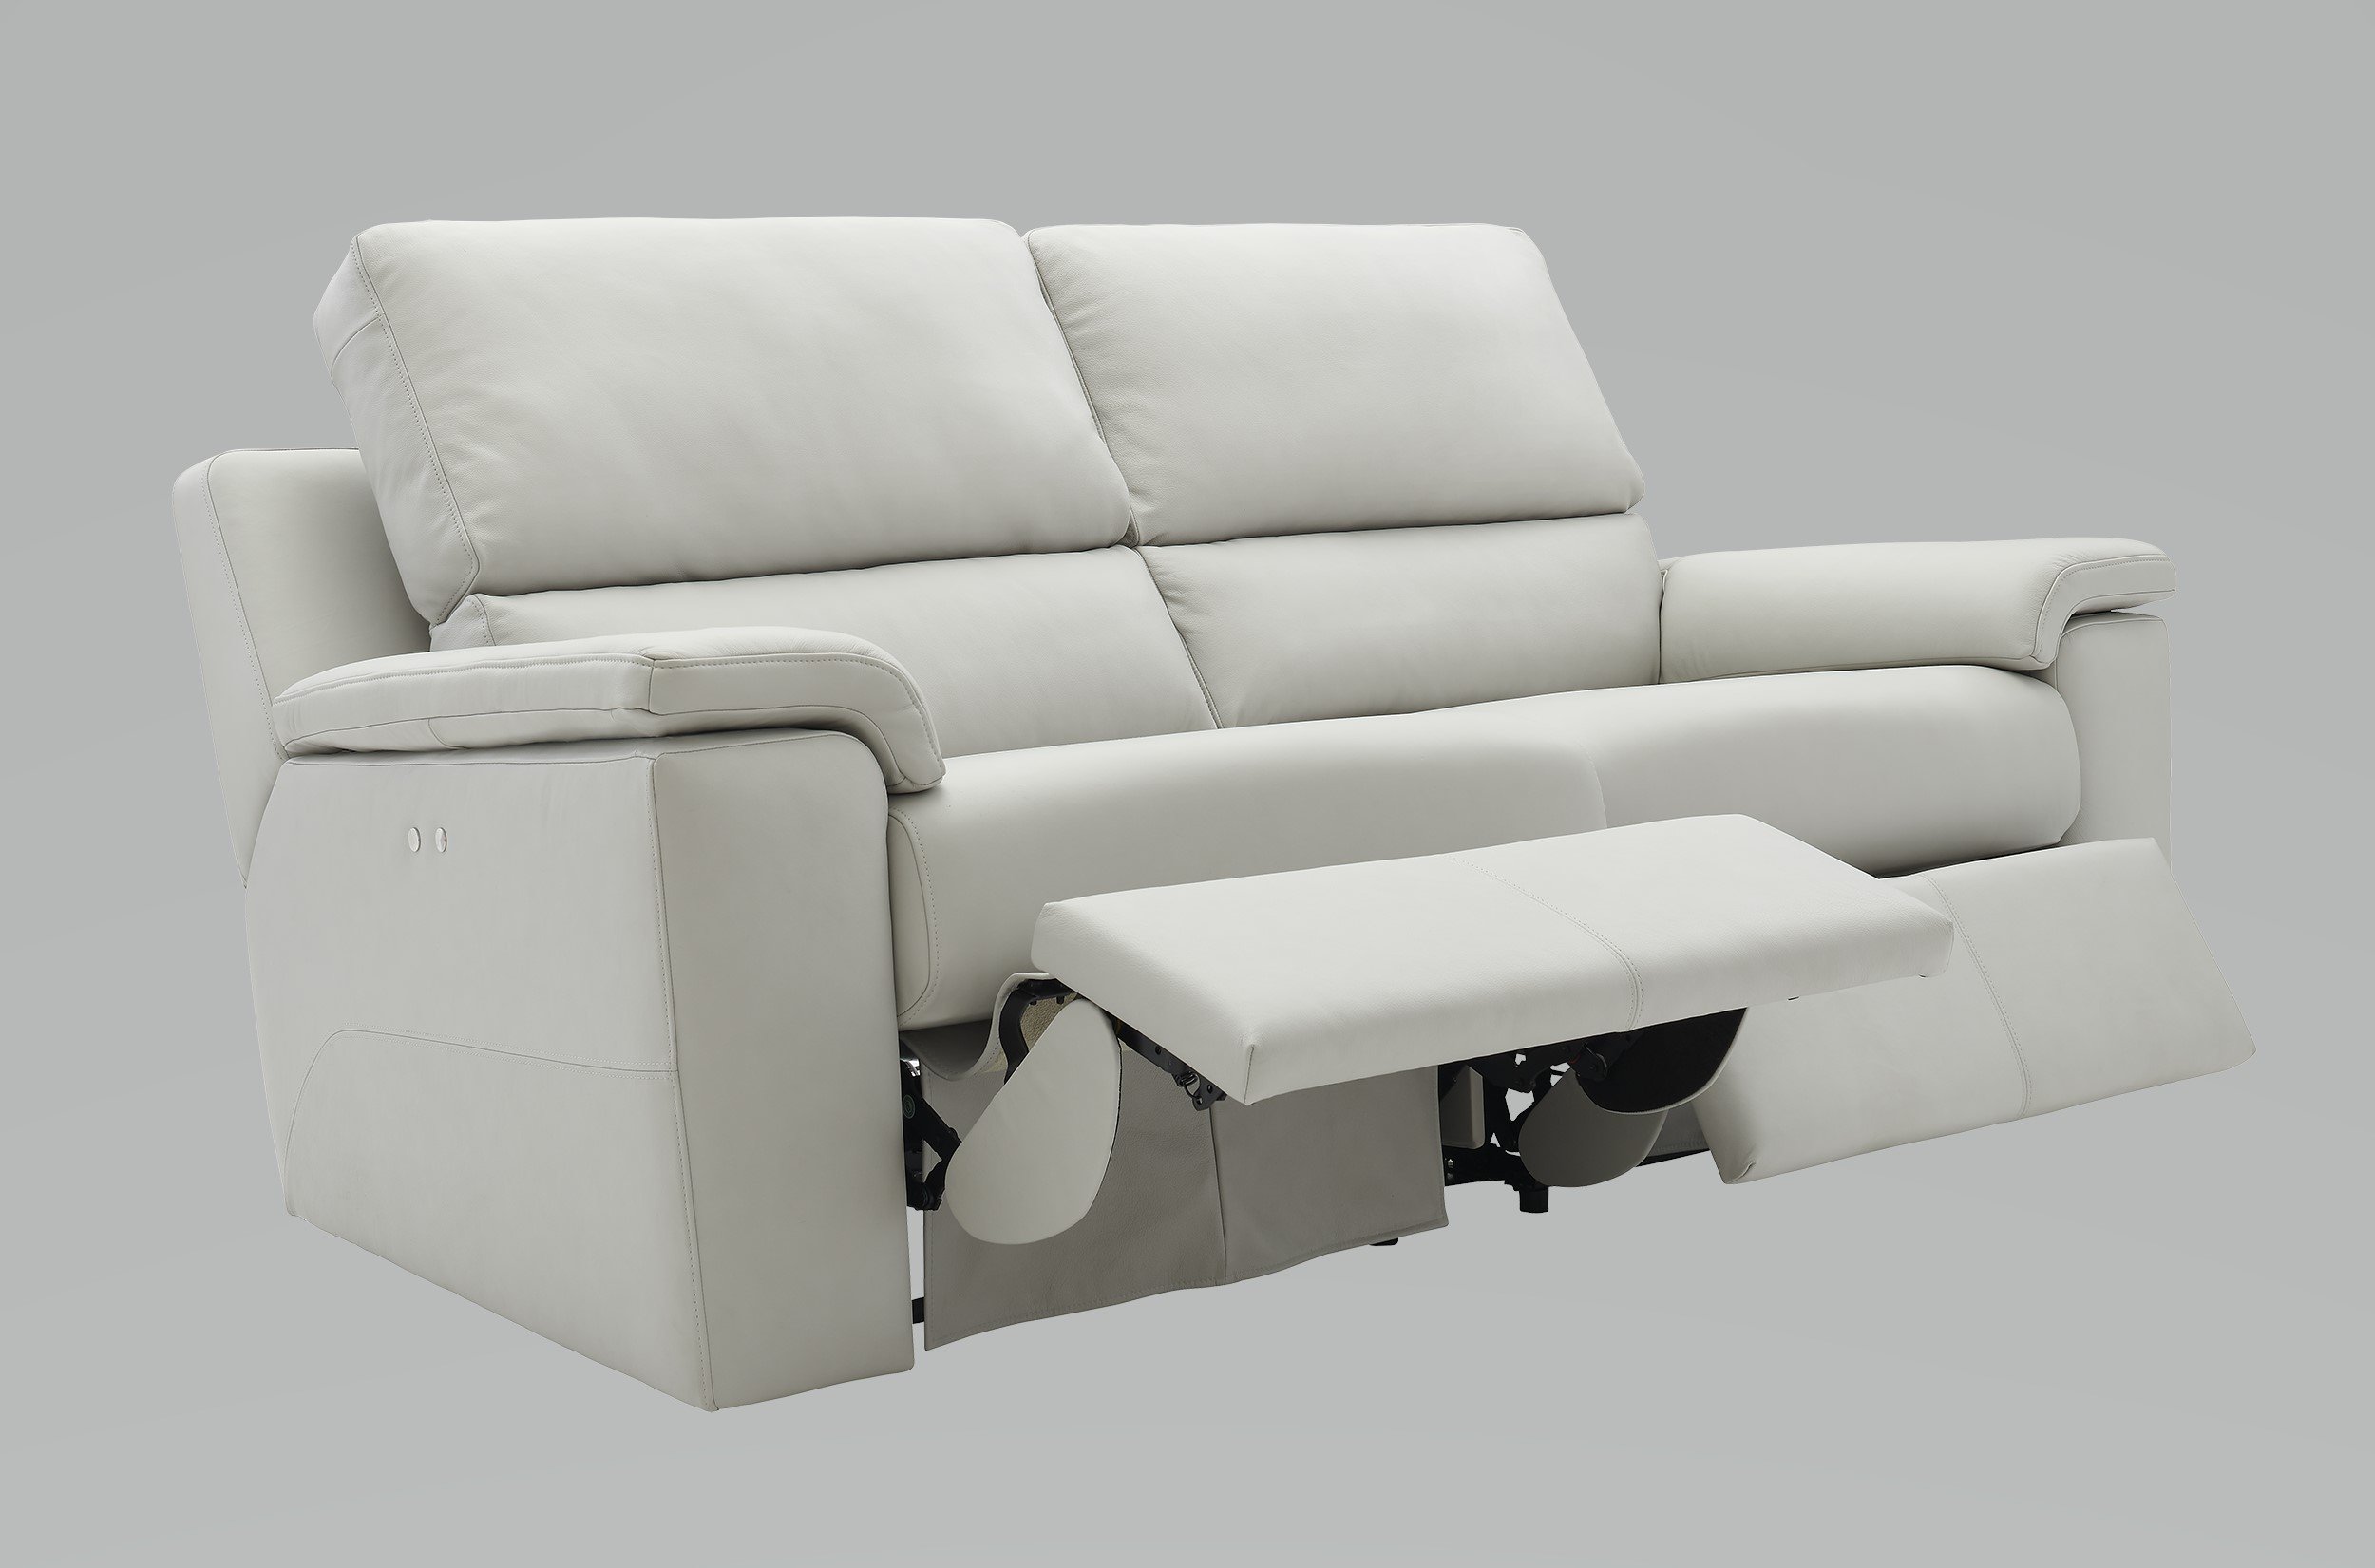 3 seater recliner leather sofa singapore